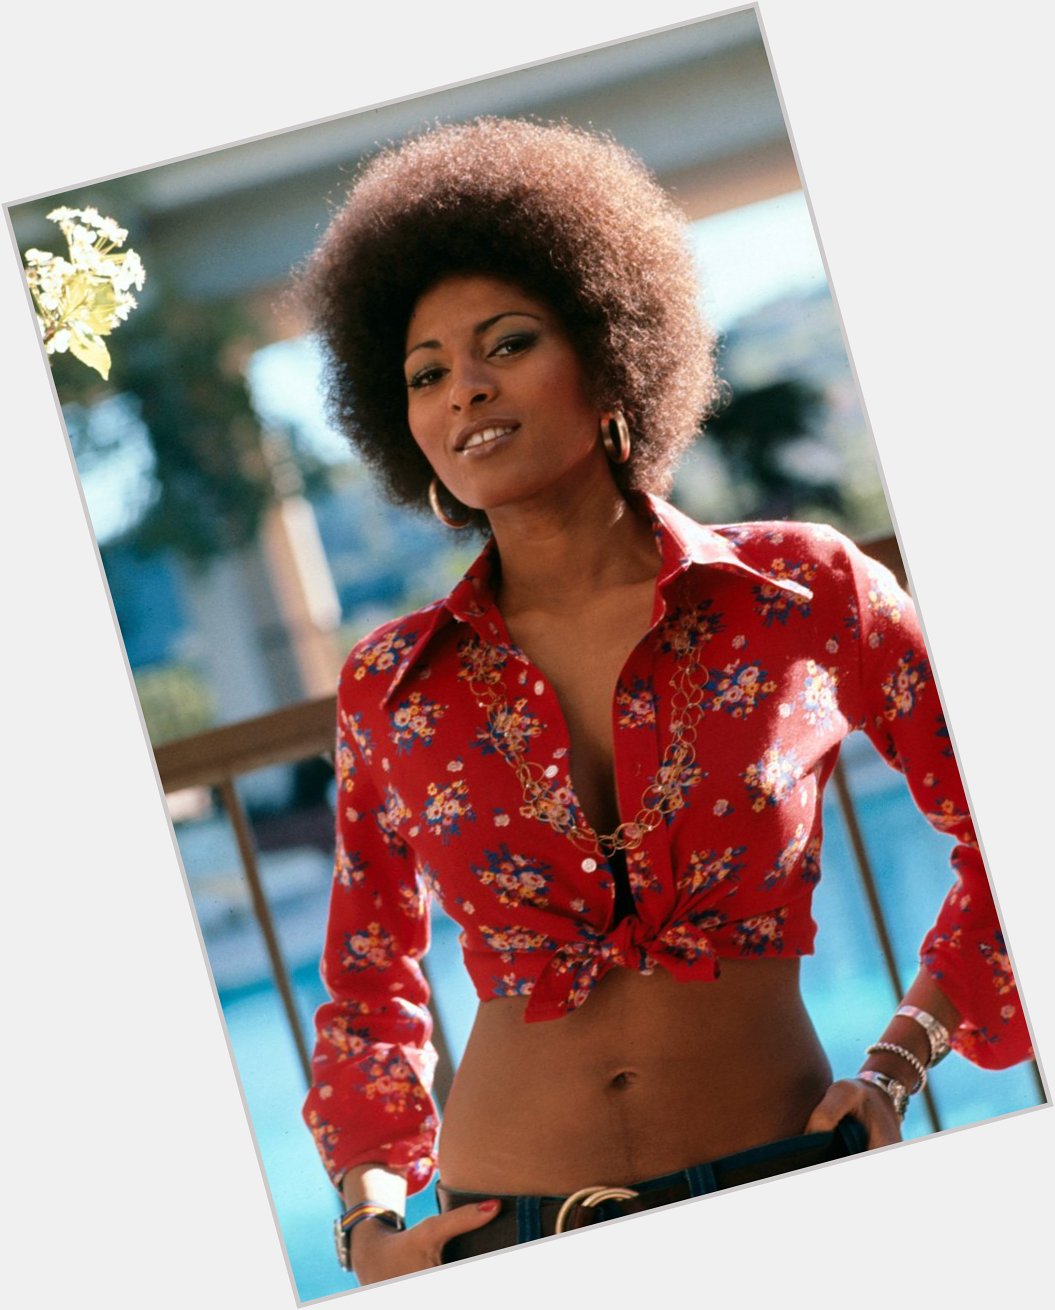 Wishing the fabulous Pam Grier a very happy birthday! 